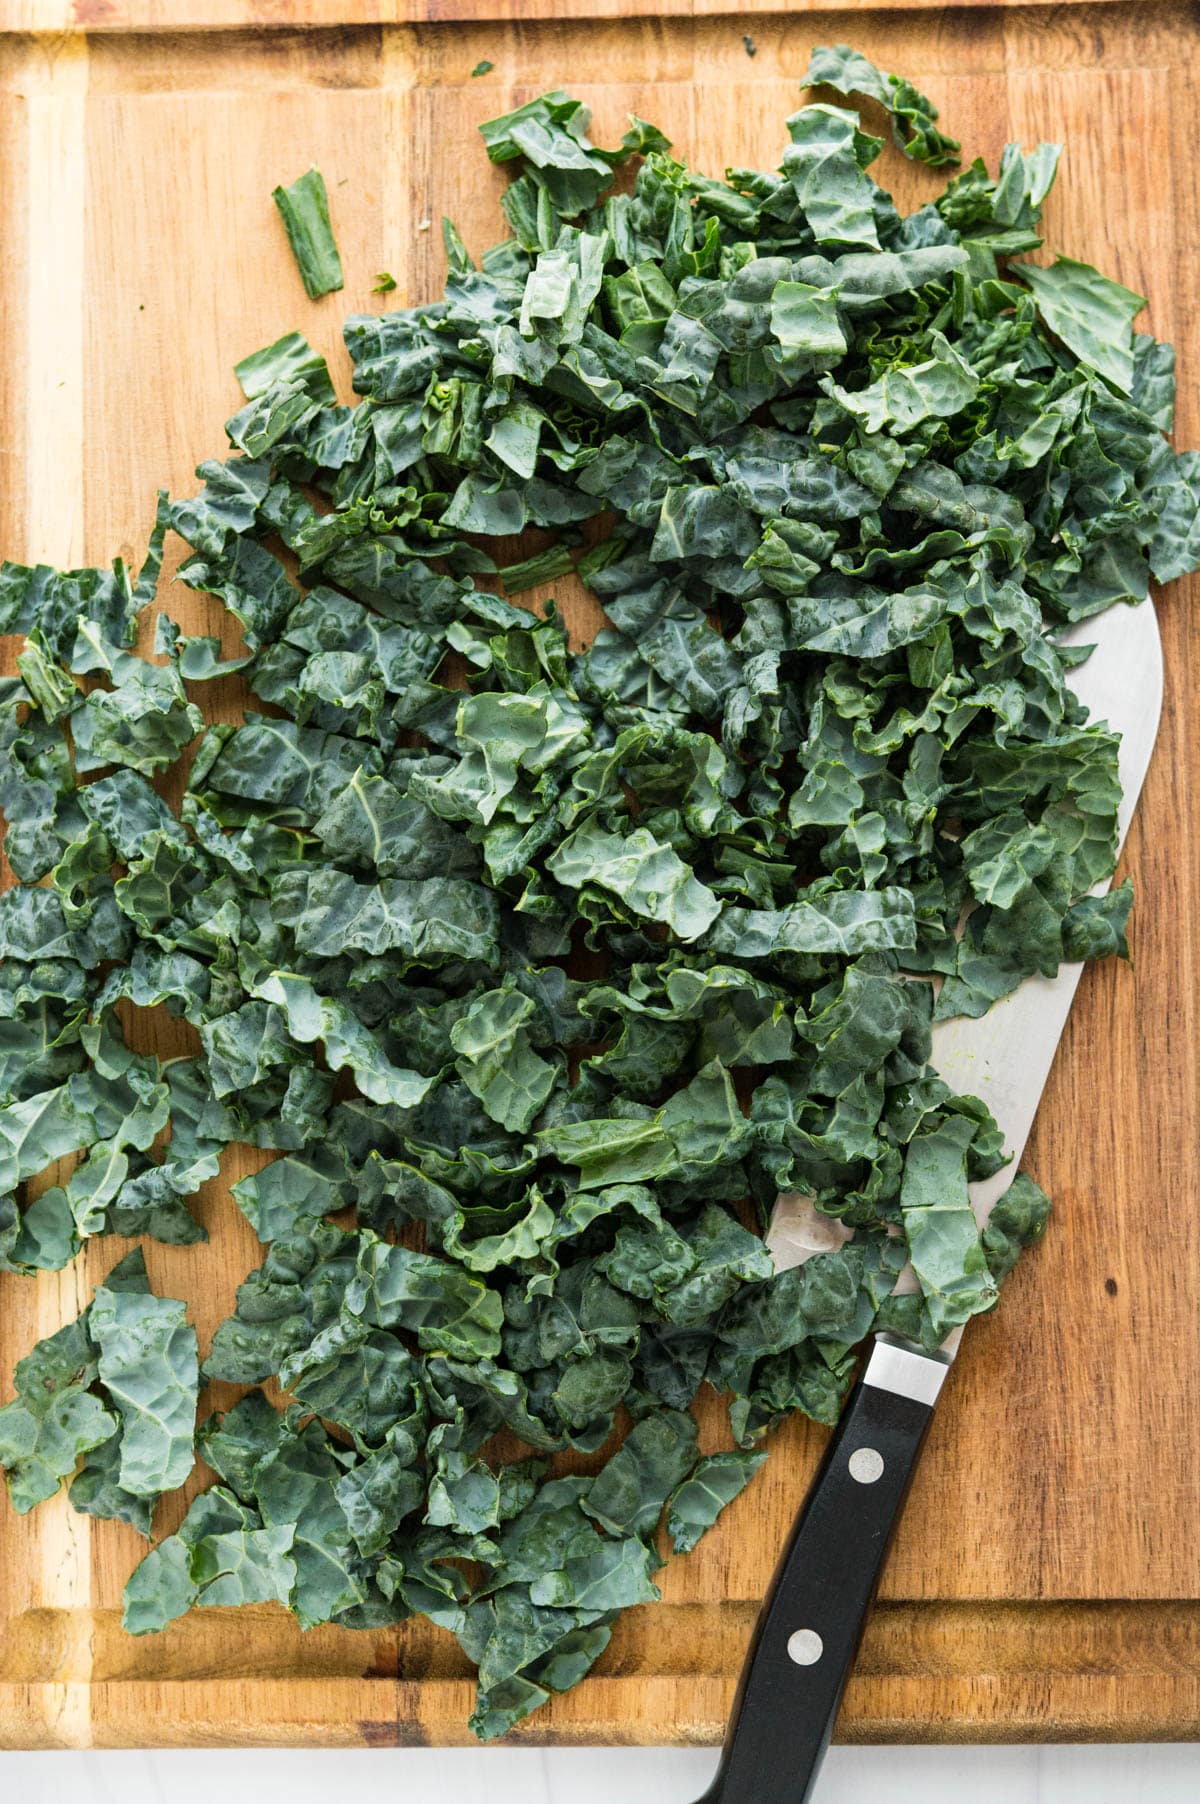 Chopping the kale into ribbons.